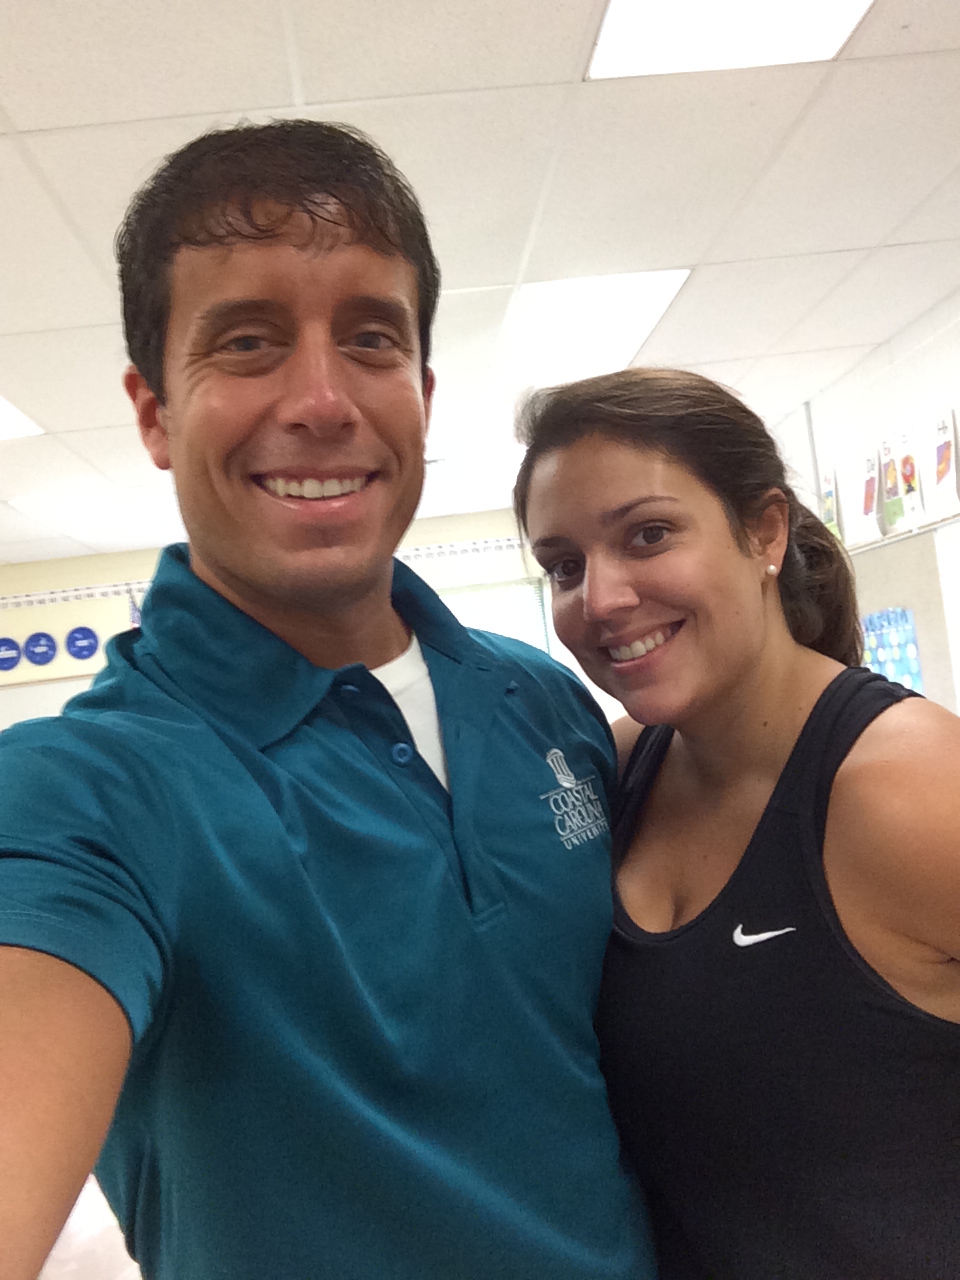 Sidney and I in her classroom last year.